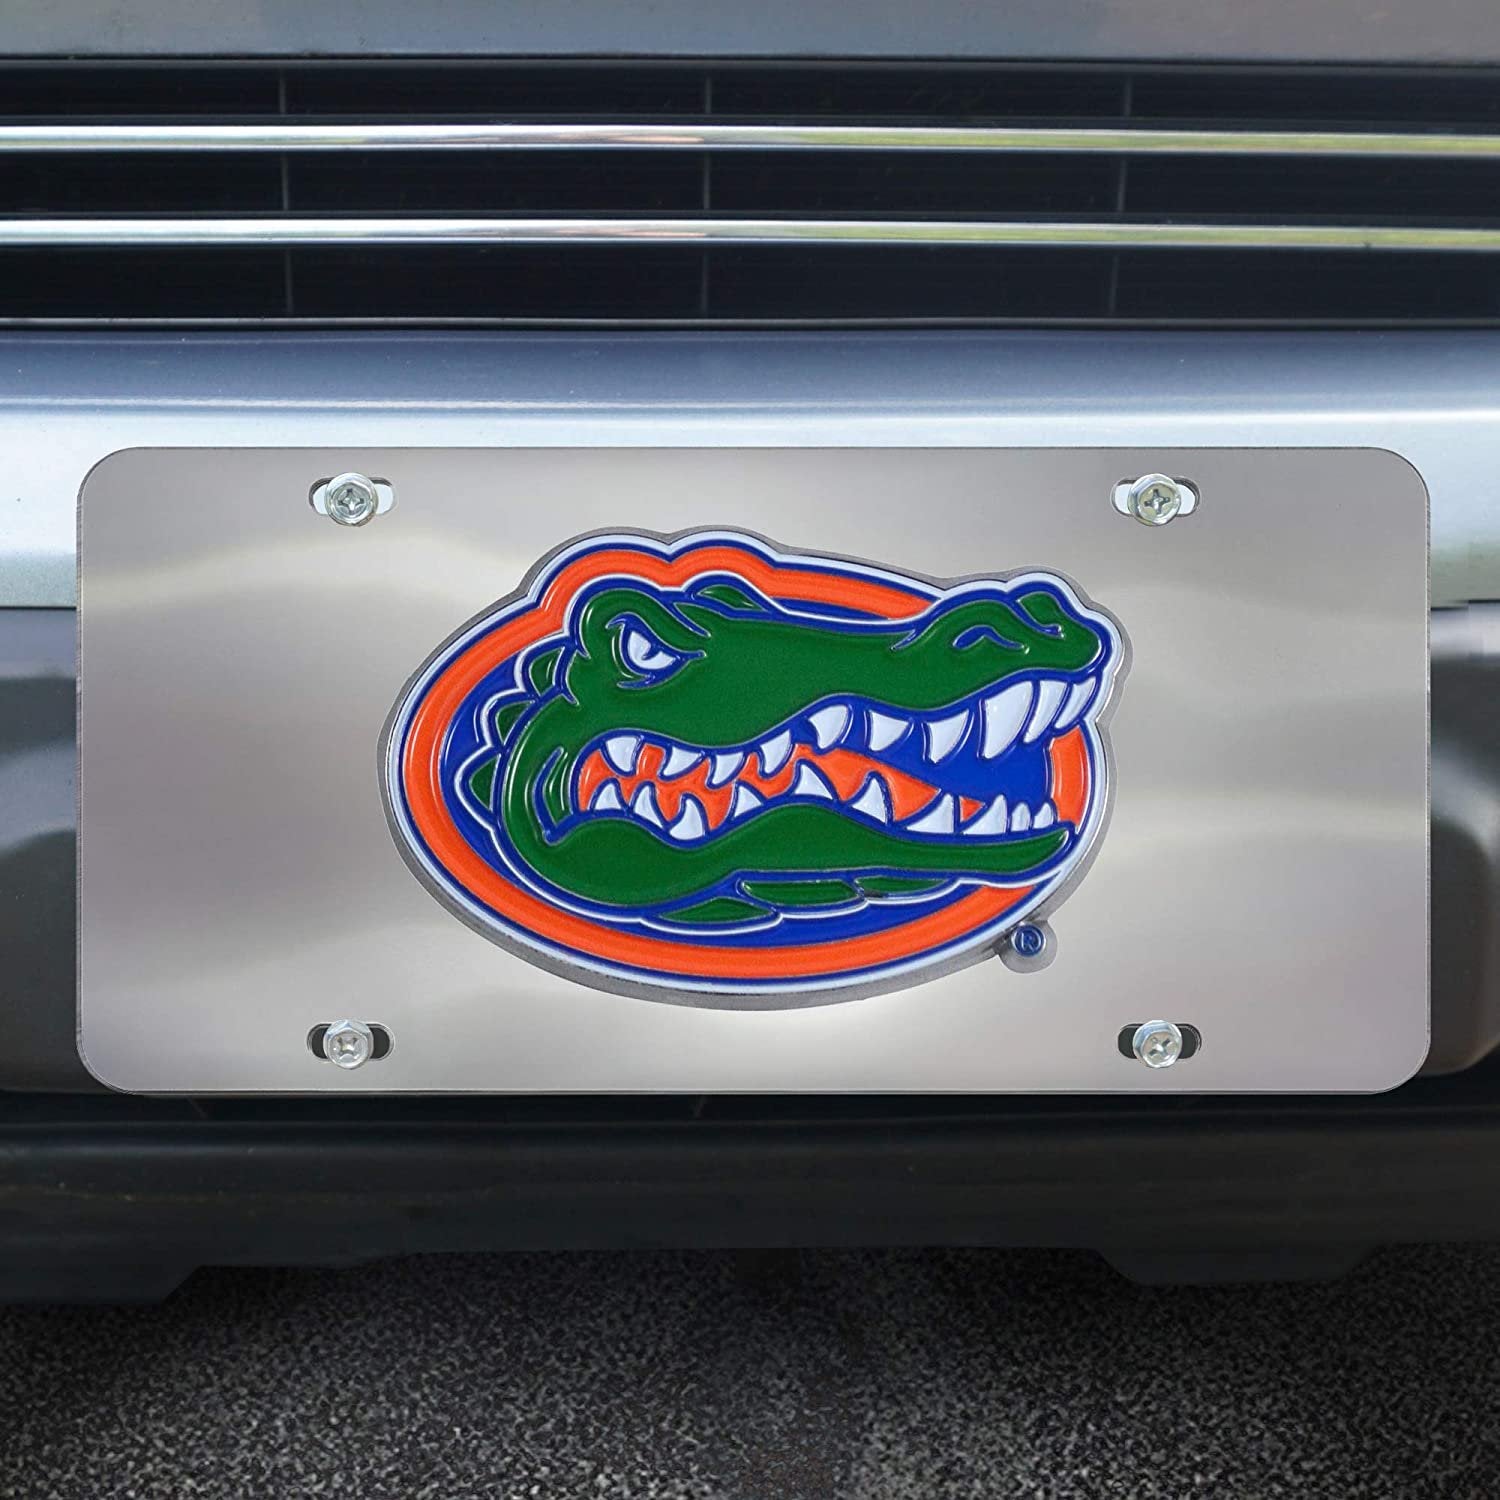 University of Florida Gators License Plate Tag, Premium Stainless Steel Diecast, Chrome, Raised Solid Metal Color Emblem, 6x12 Inch